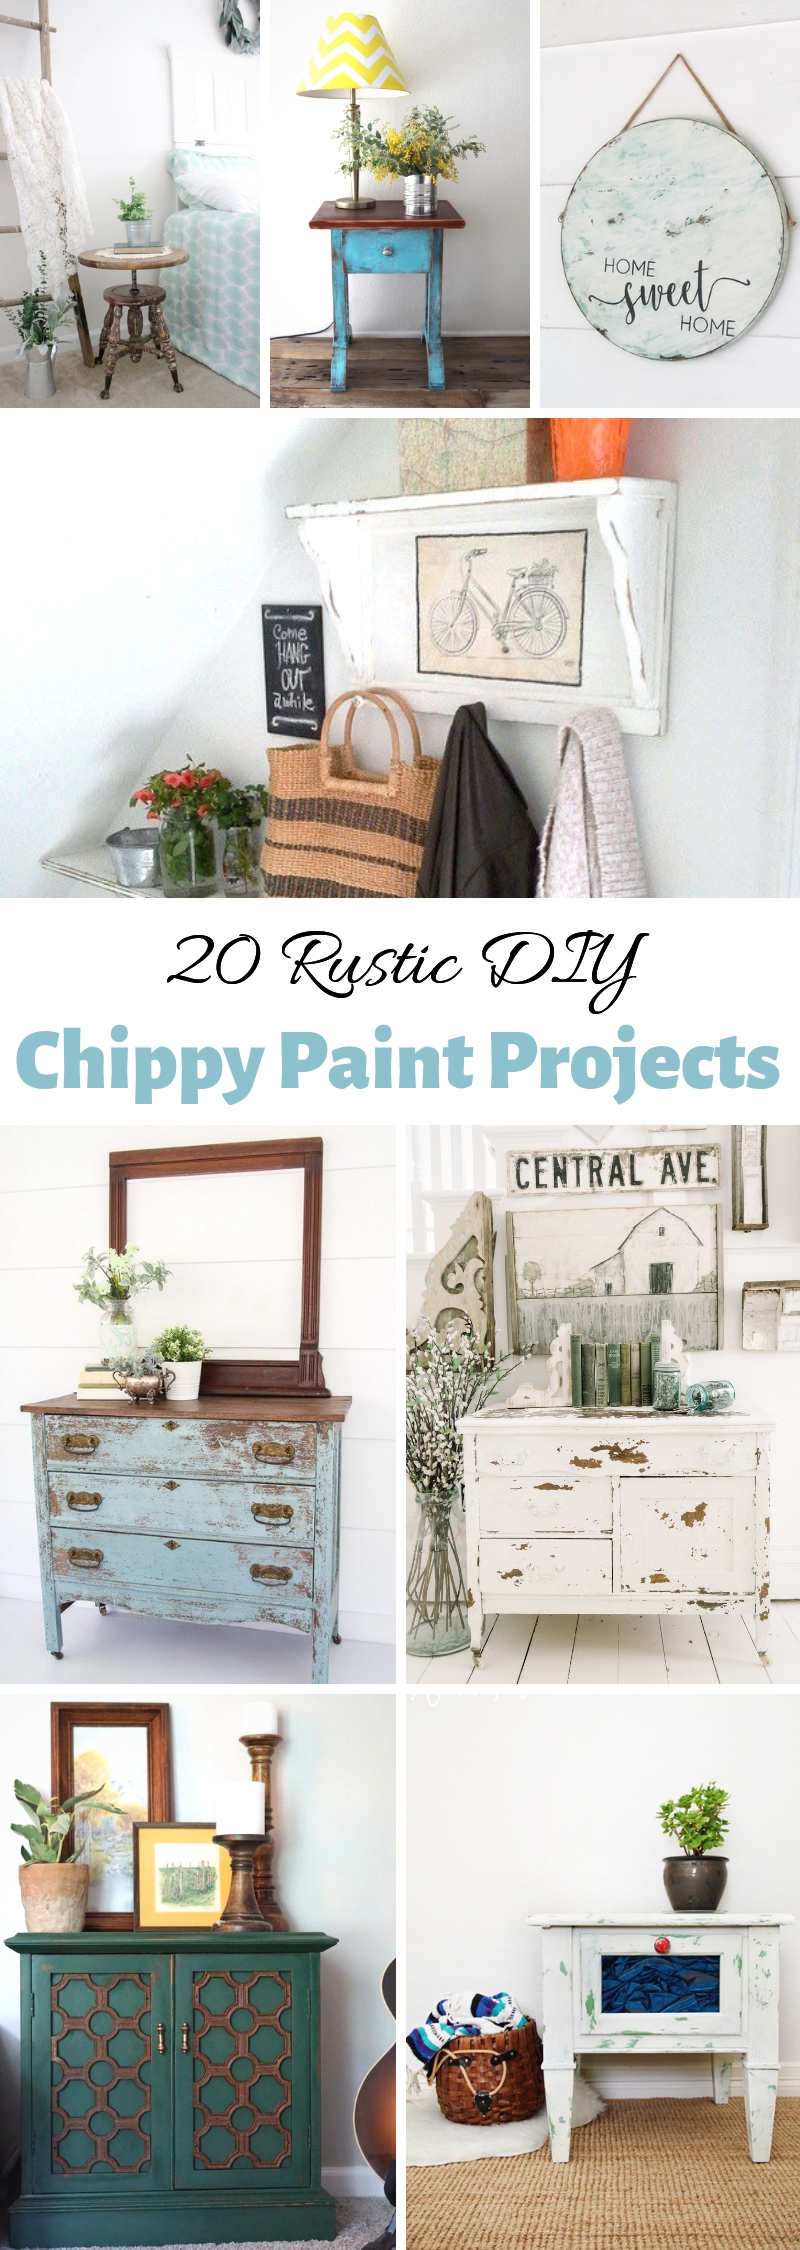 20 Rustic DIY Chippy Paint Projects